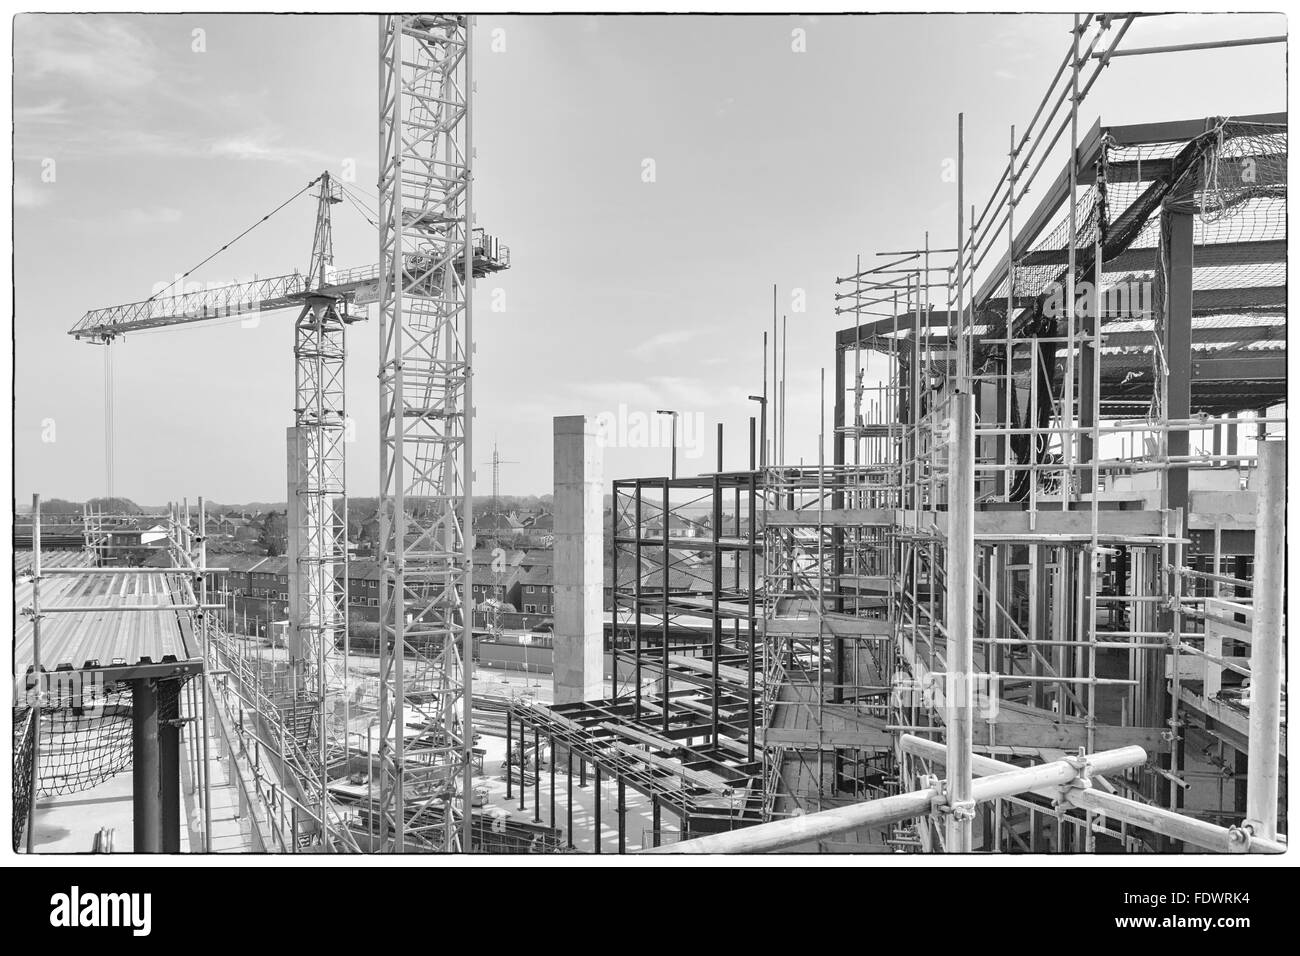 Apri 2015 - Dorchester, England: A construction site with concrete slabs built, steel framing and scaffolding Stock Photo